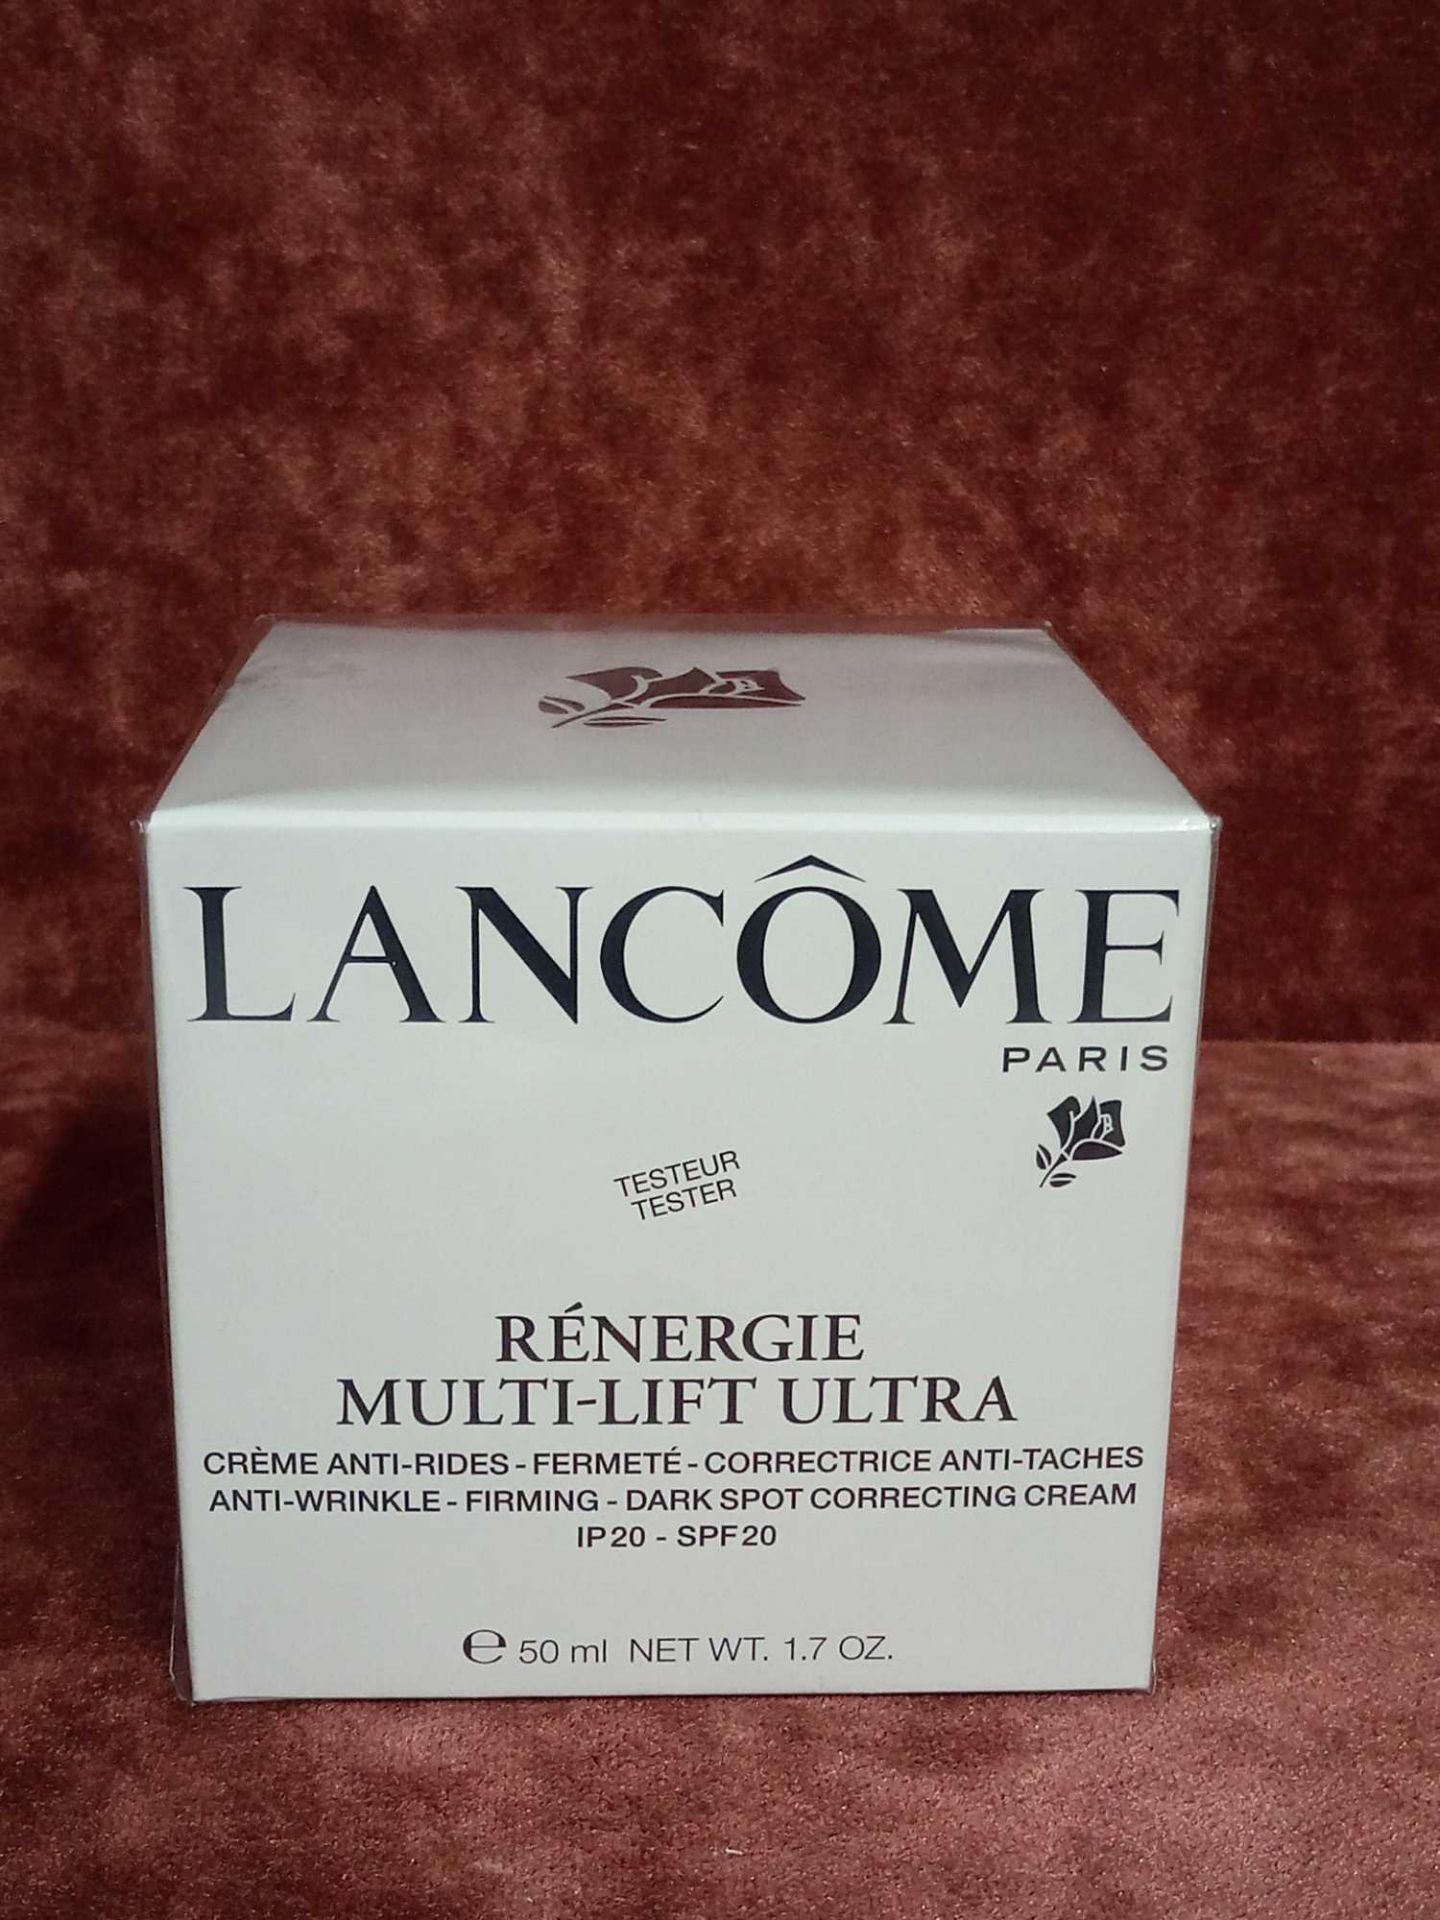 RRP £80 Brand New Boxed And Sealed Lancome Paris Renergie Multi Lift Ultra Anti-Wrinkle Firming Dark